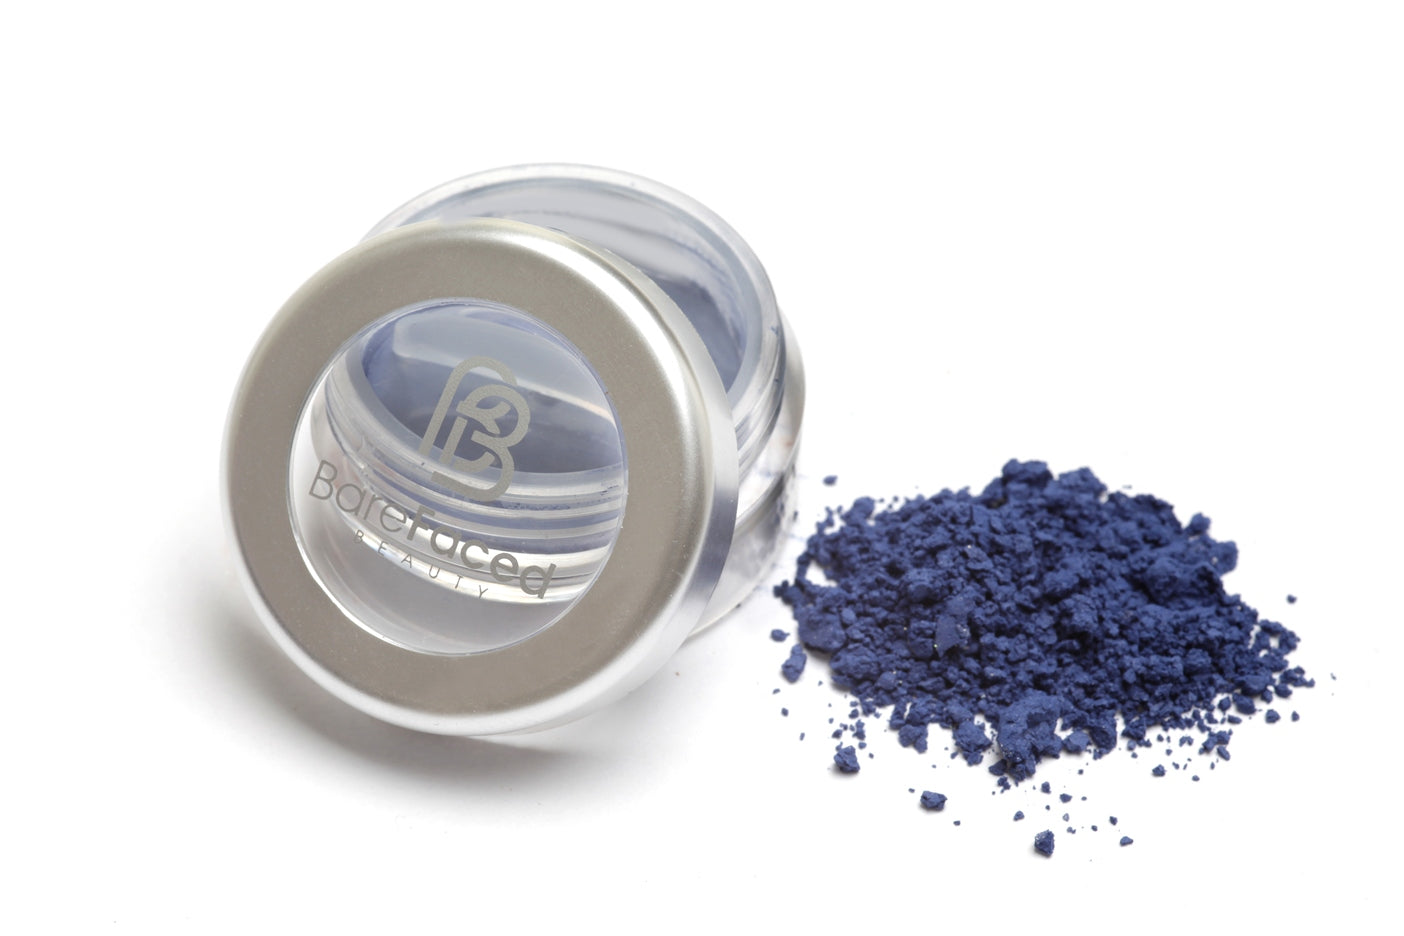 A small round pot of mineral eyeshadow, with a swatch of the powder next to it showing a matt deep smokey blue shade